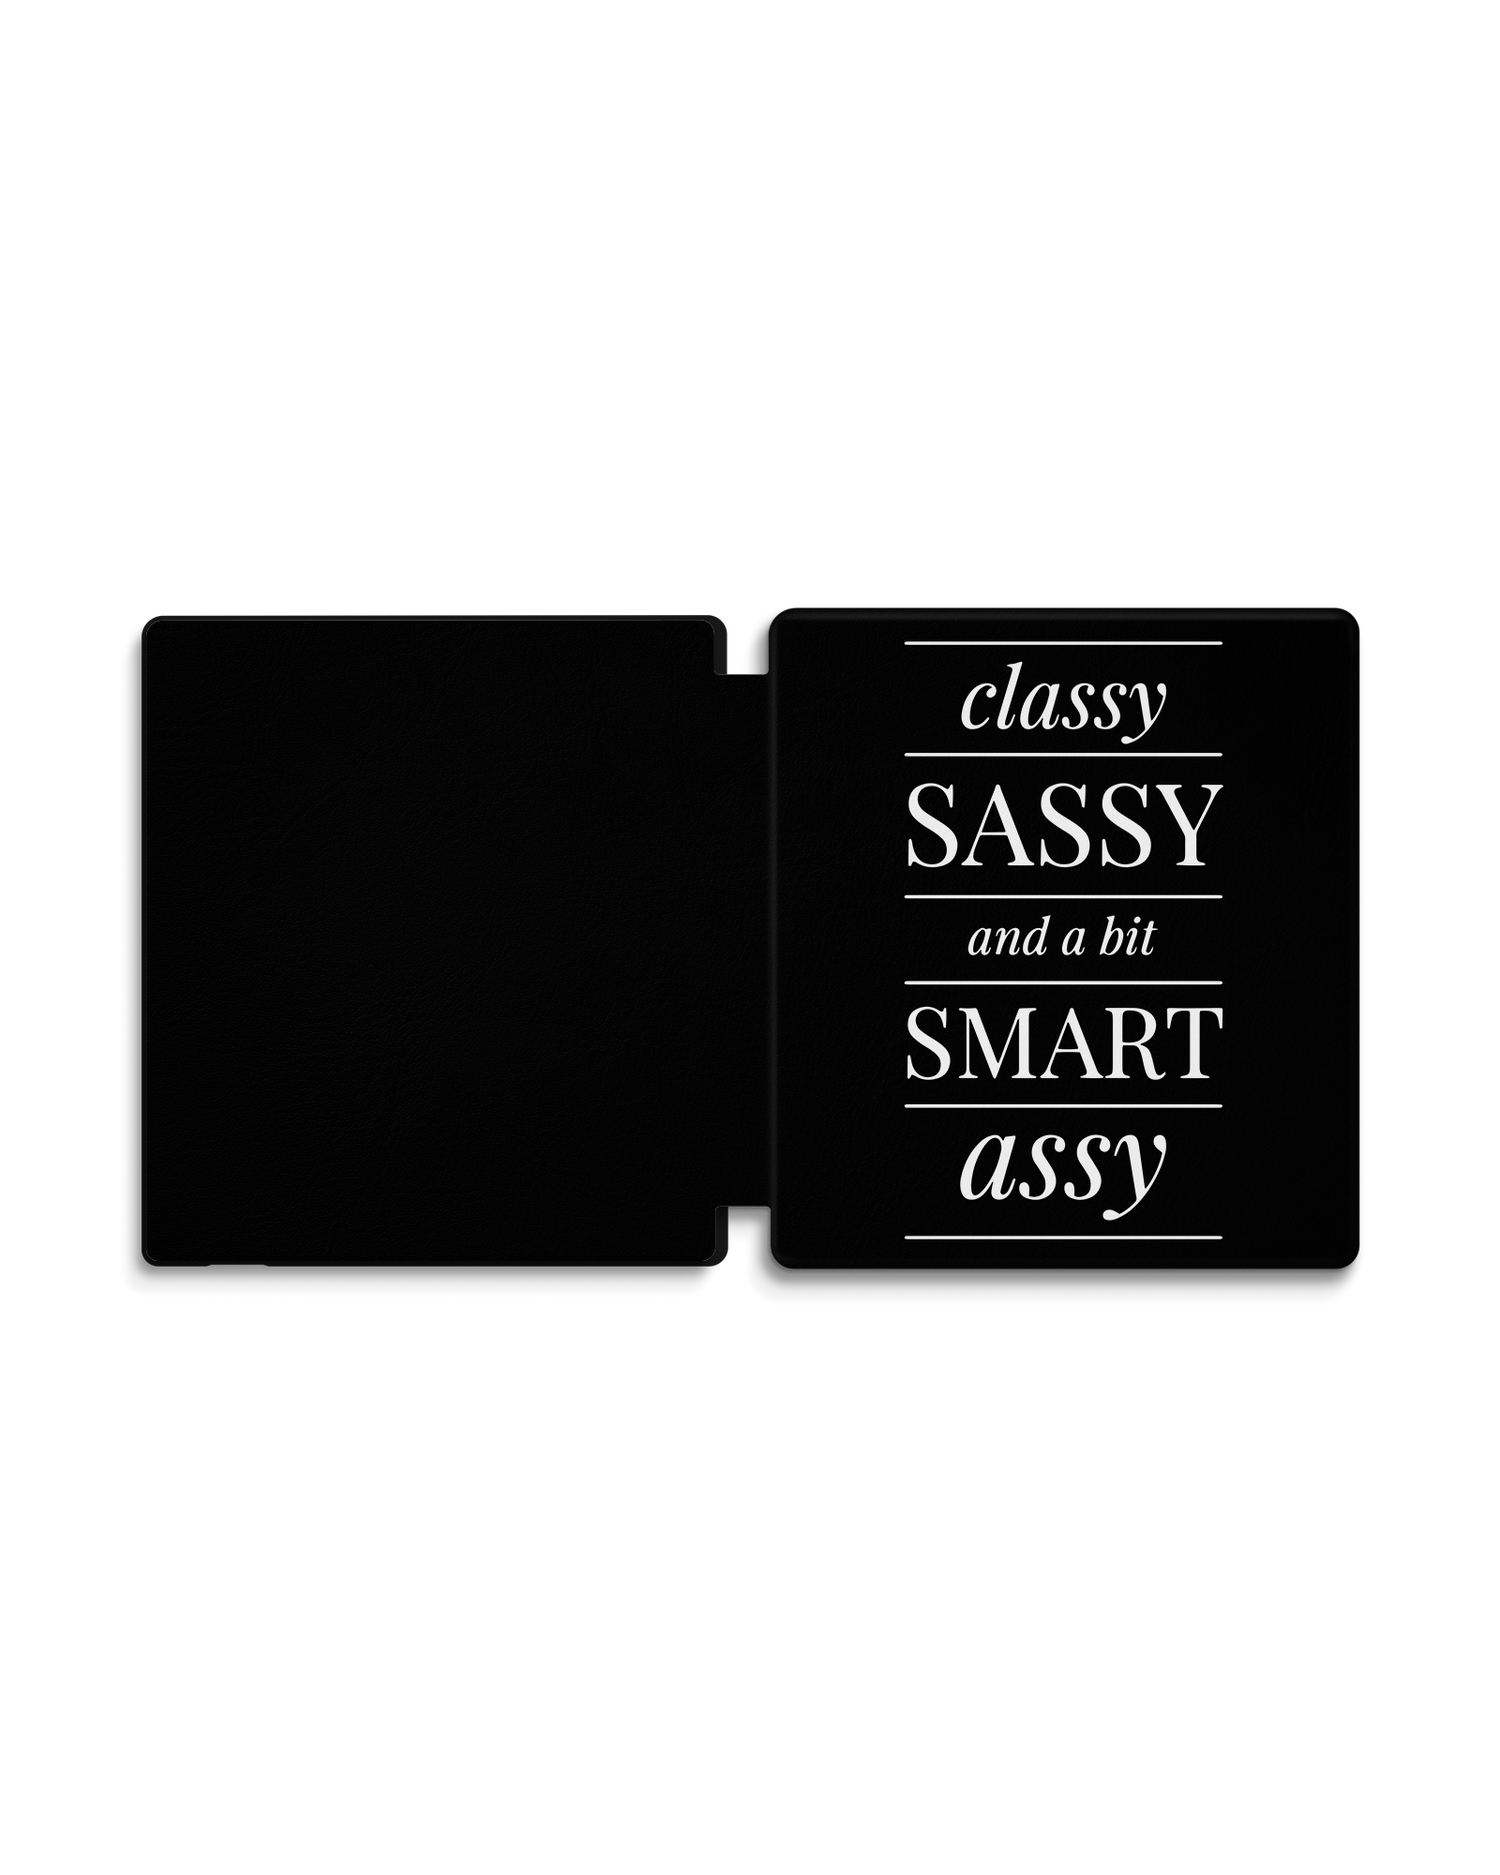 Classy Sassy eReader Smart Case for Amazon Kindle Oasis: Opened exterior view